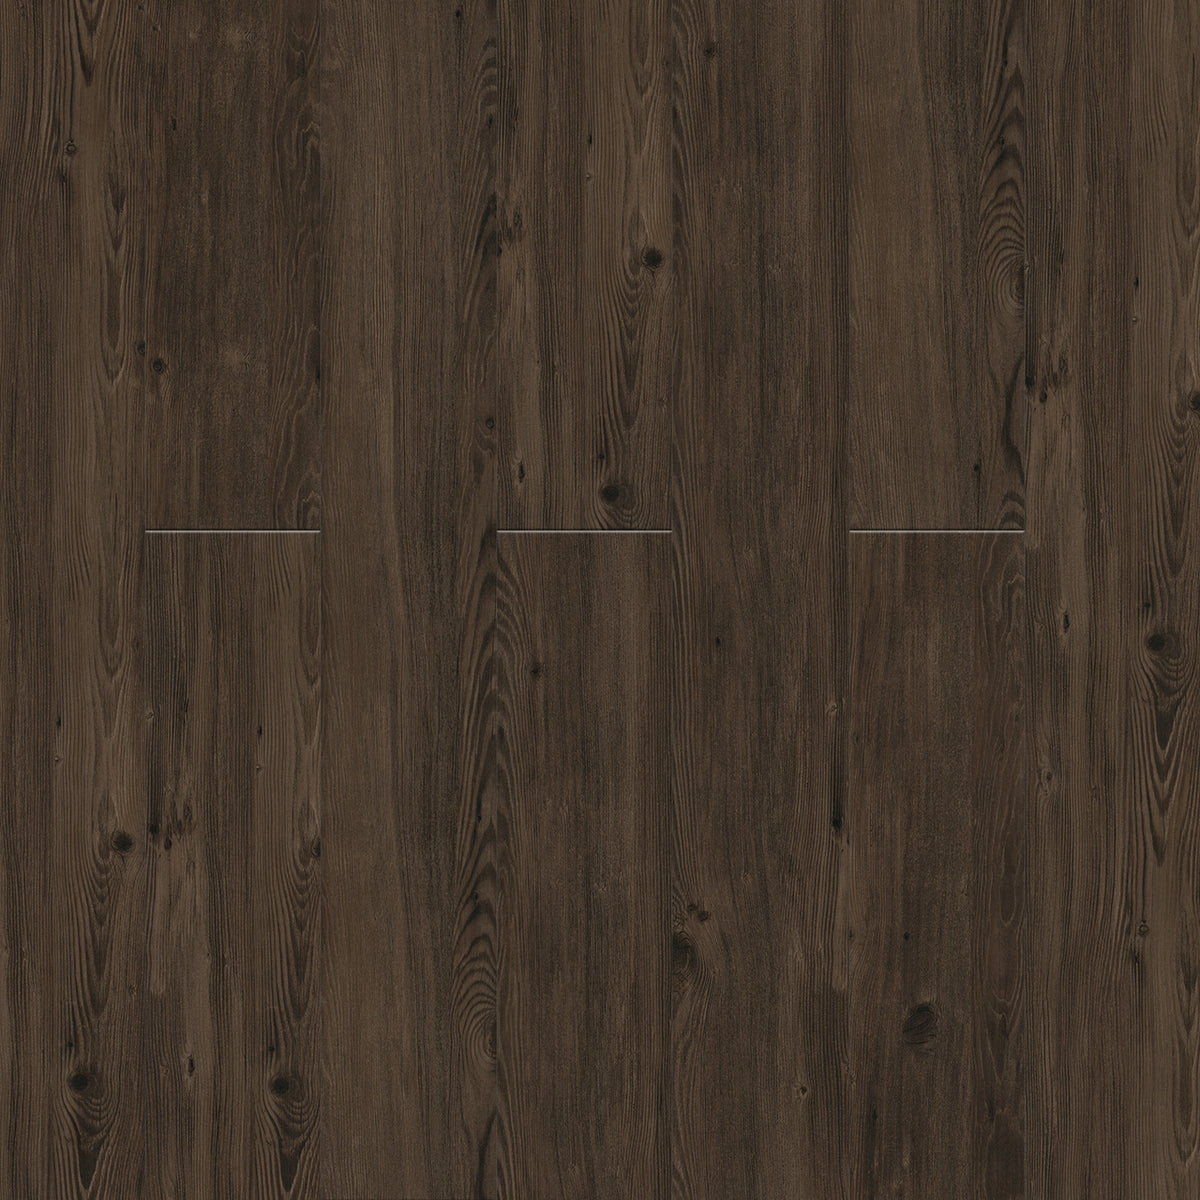 Engineered Floors - Ozark 2 Collection - 7 in. x 48 in. - Weathered Chestnut